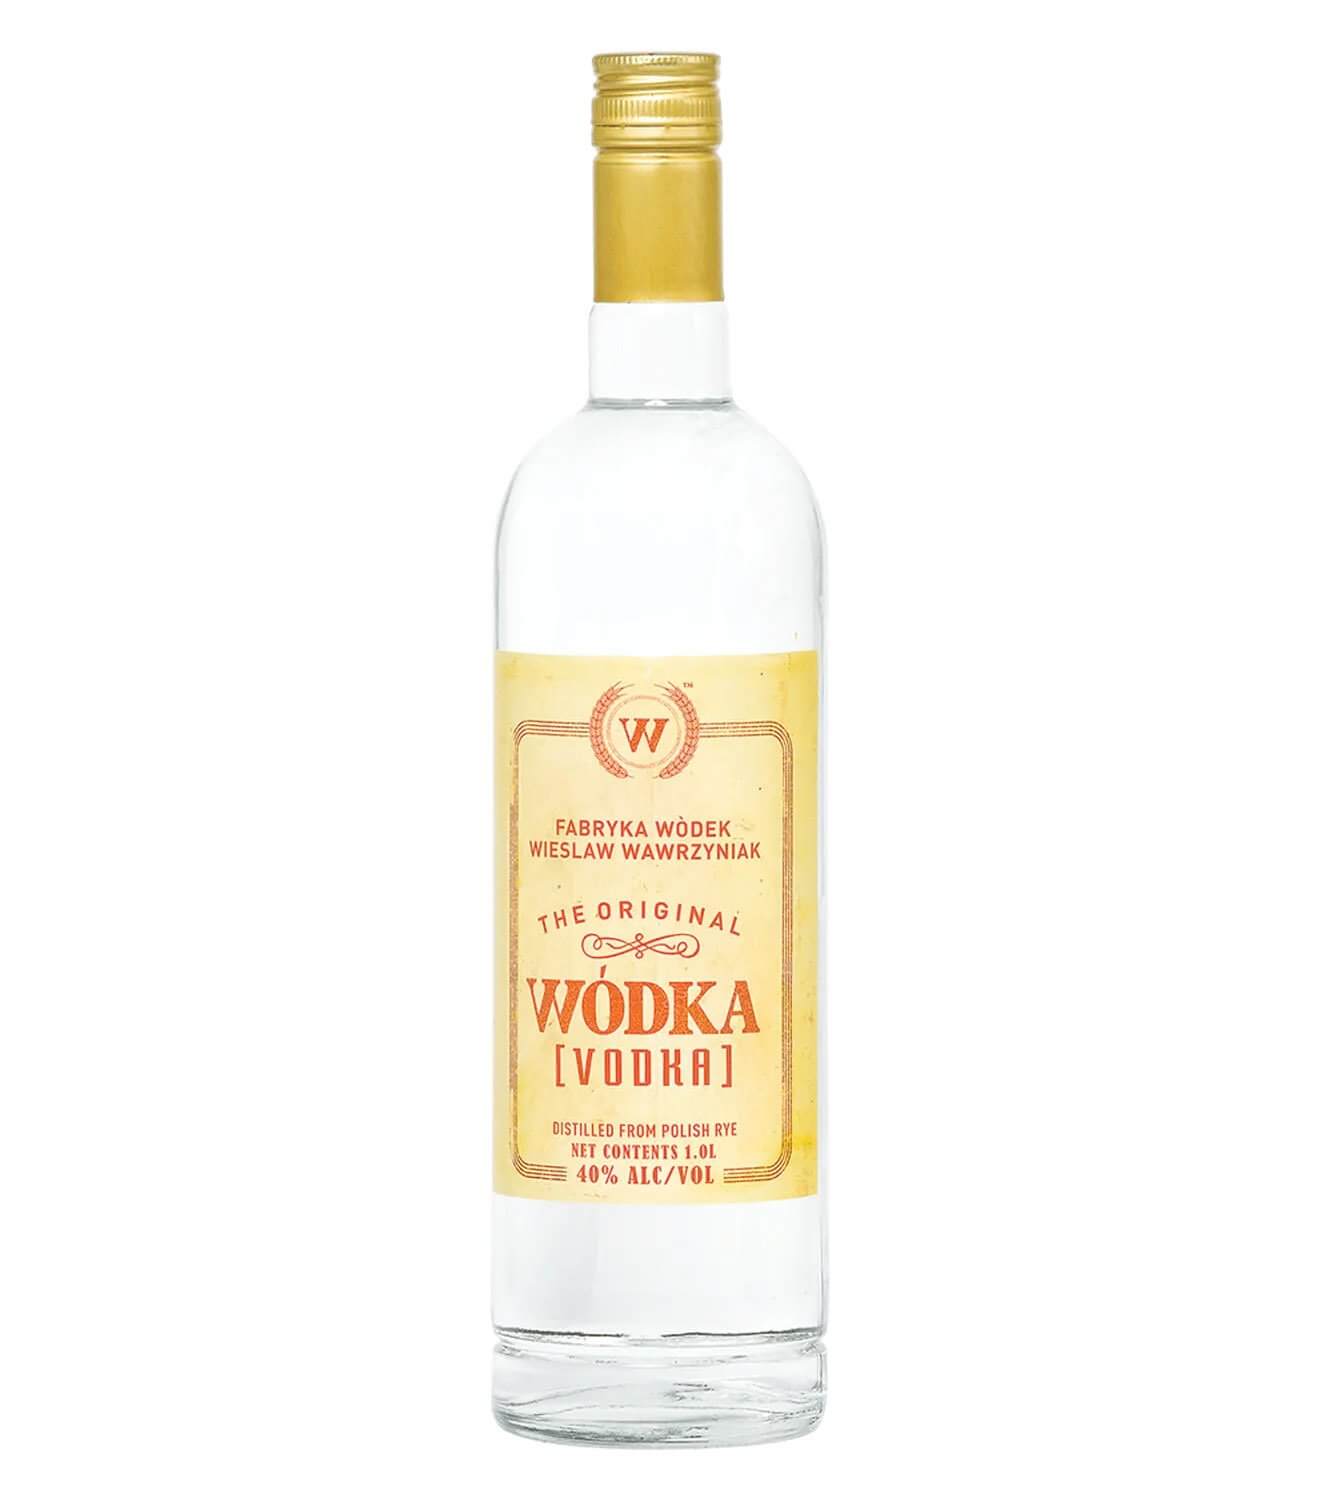 Picks | Chilled the Neat Enthusiasts Sipping for Magazine Polish Discover Best Top Vodkas: 10